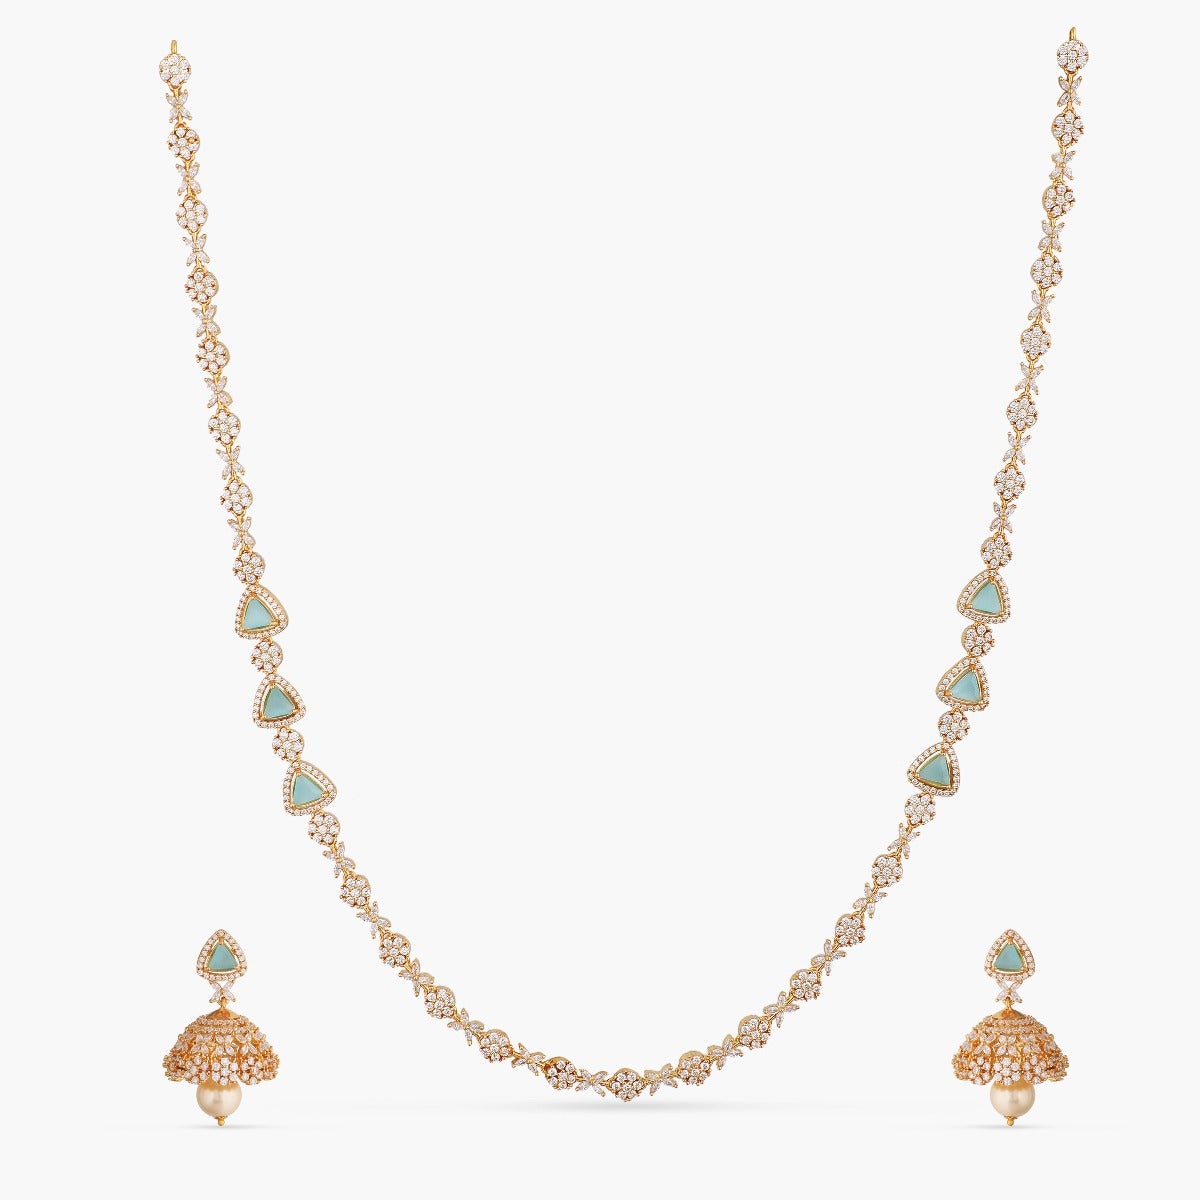 A picture of an Indian artificial jewelry set with a gold-toned necklace and matching earrings, featuring Cubic Zirconia and green stones.